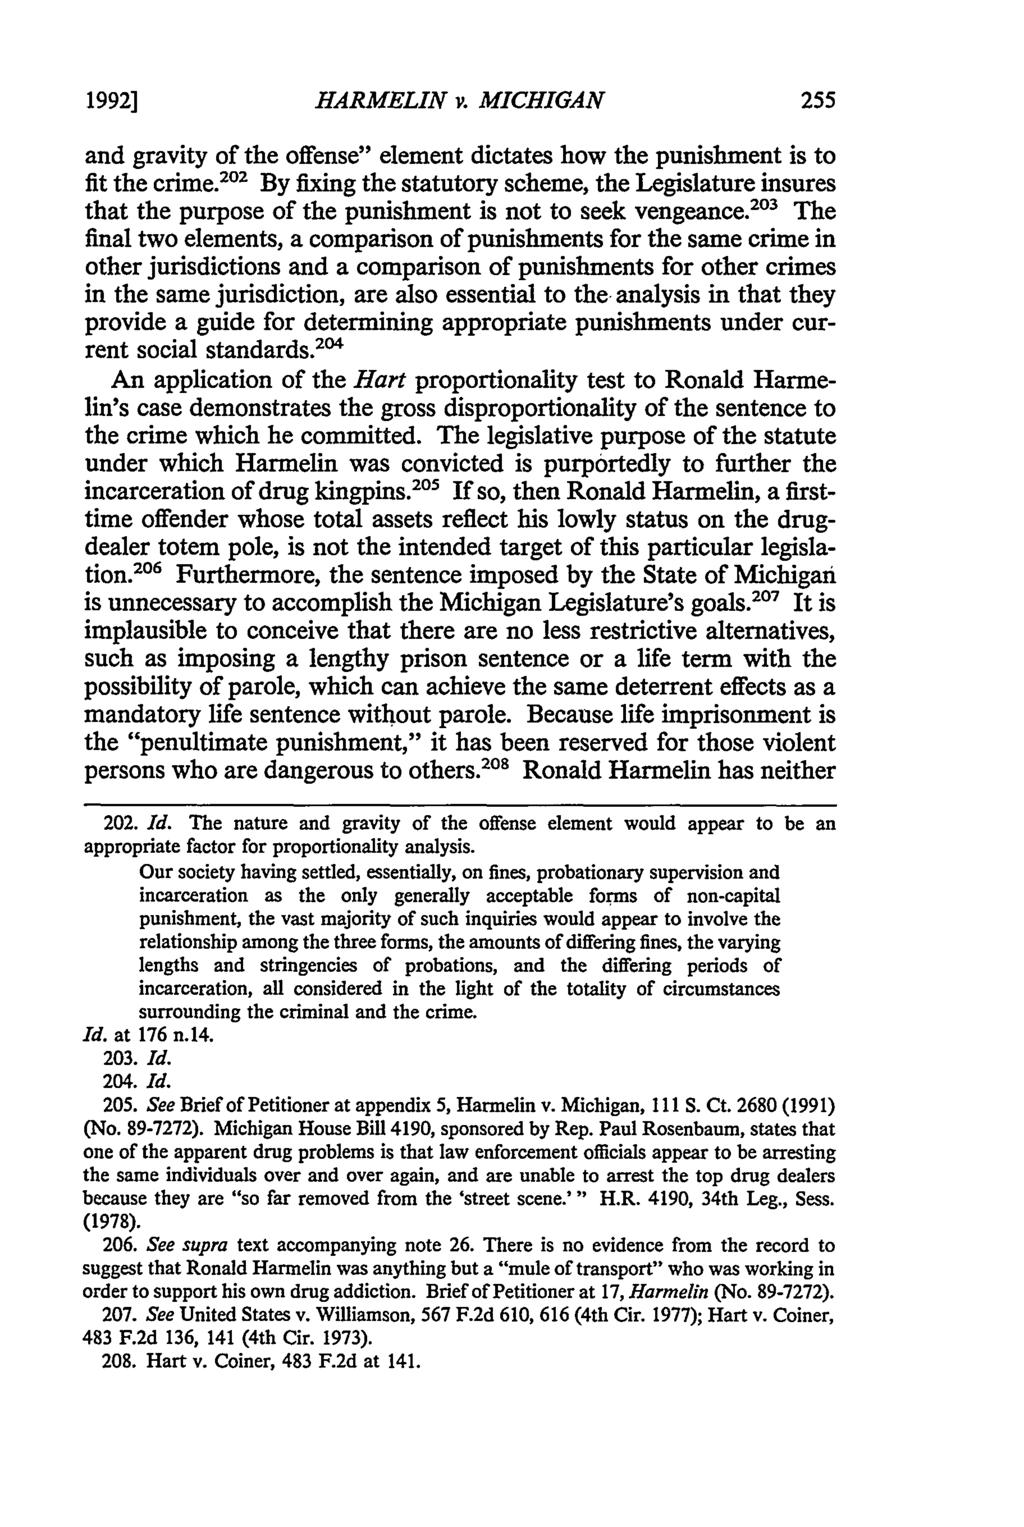 1992] HARMELIN v. MICHIGAN and gravity of the offense" element dictates how the punishment is to fit the crime.